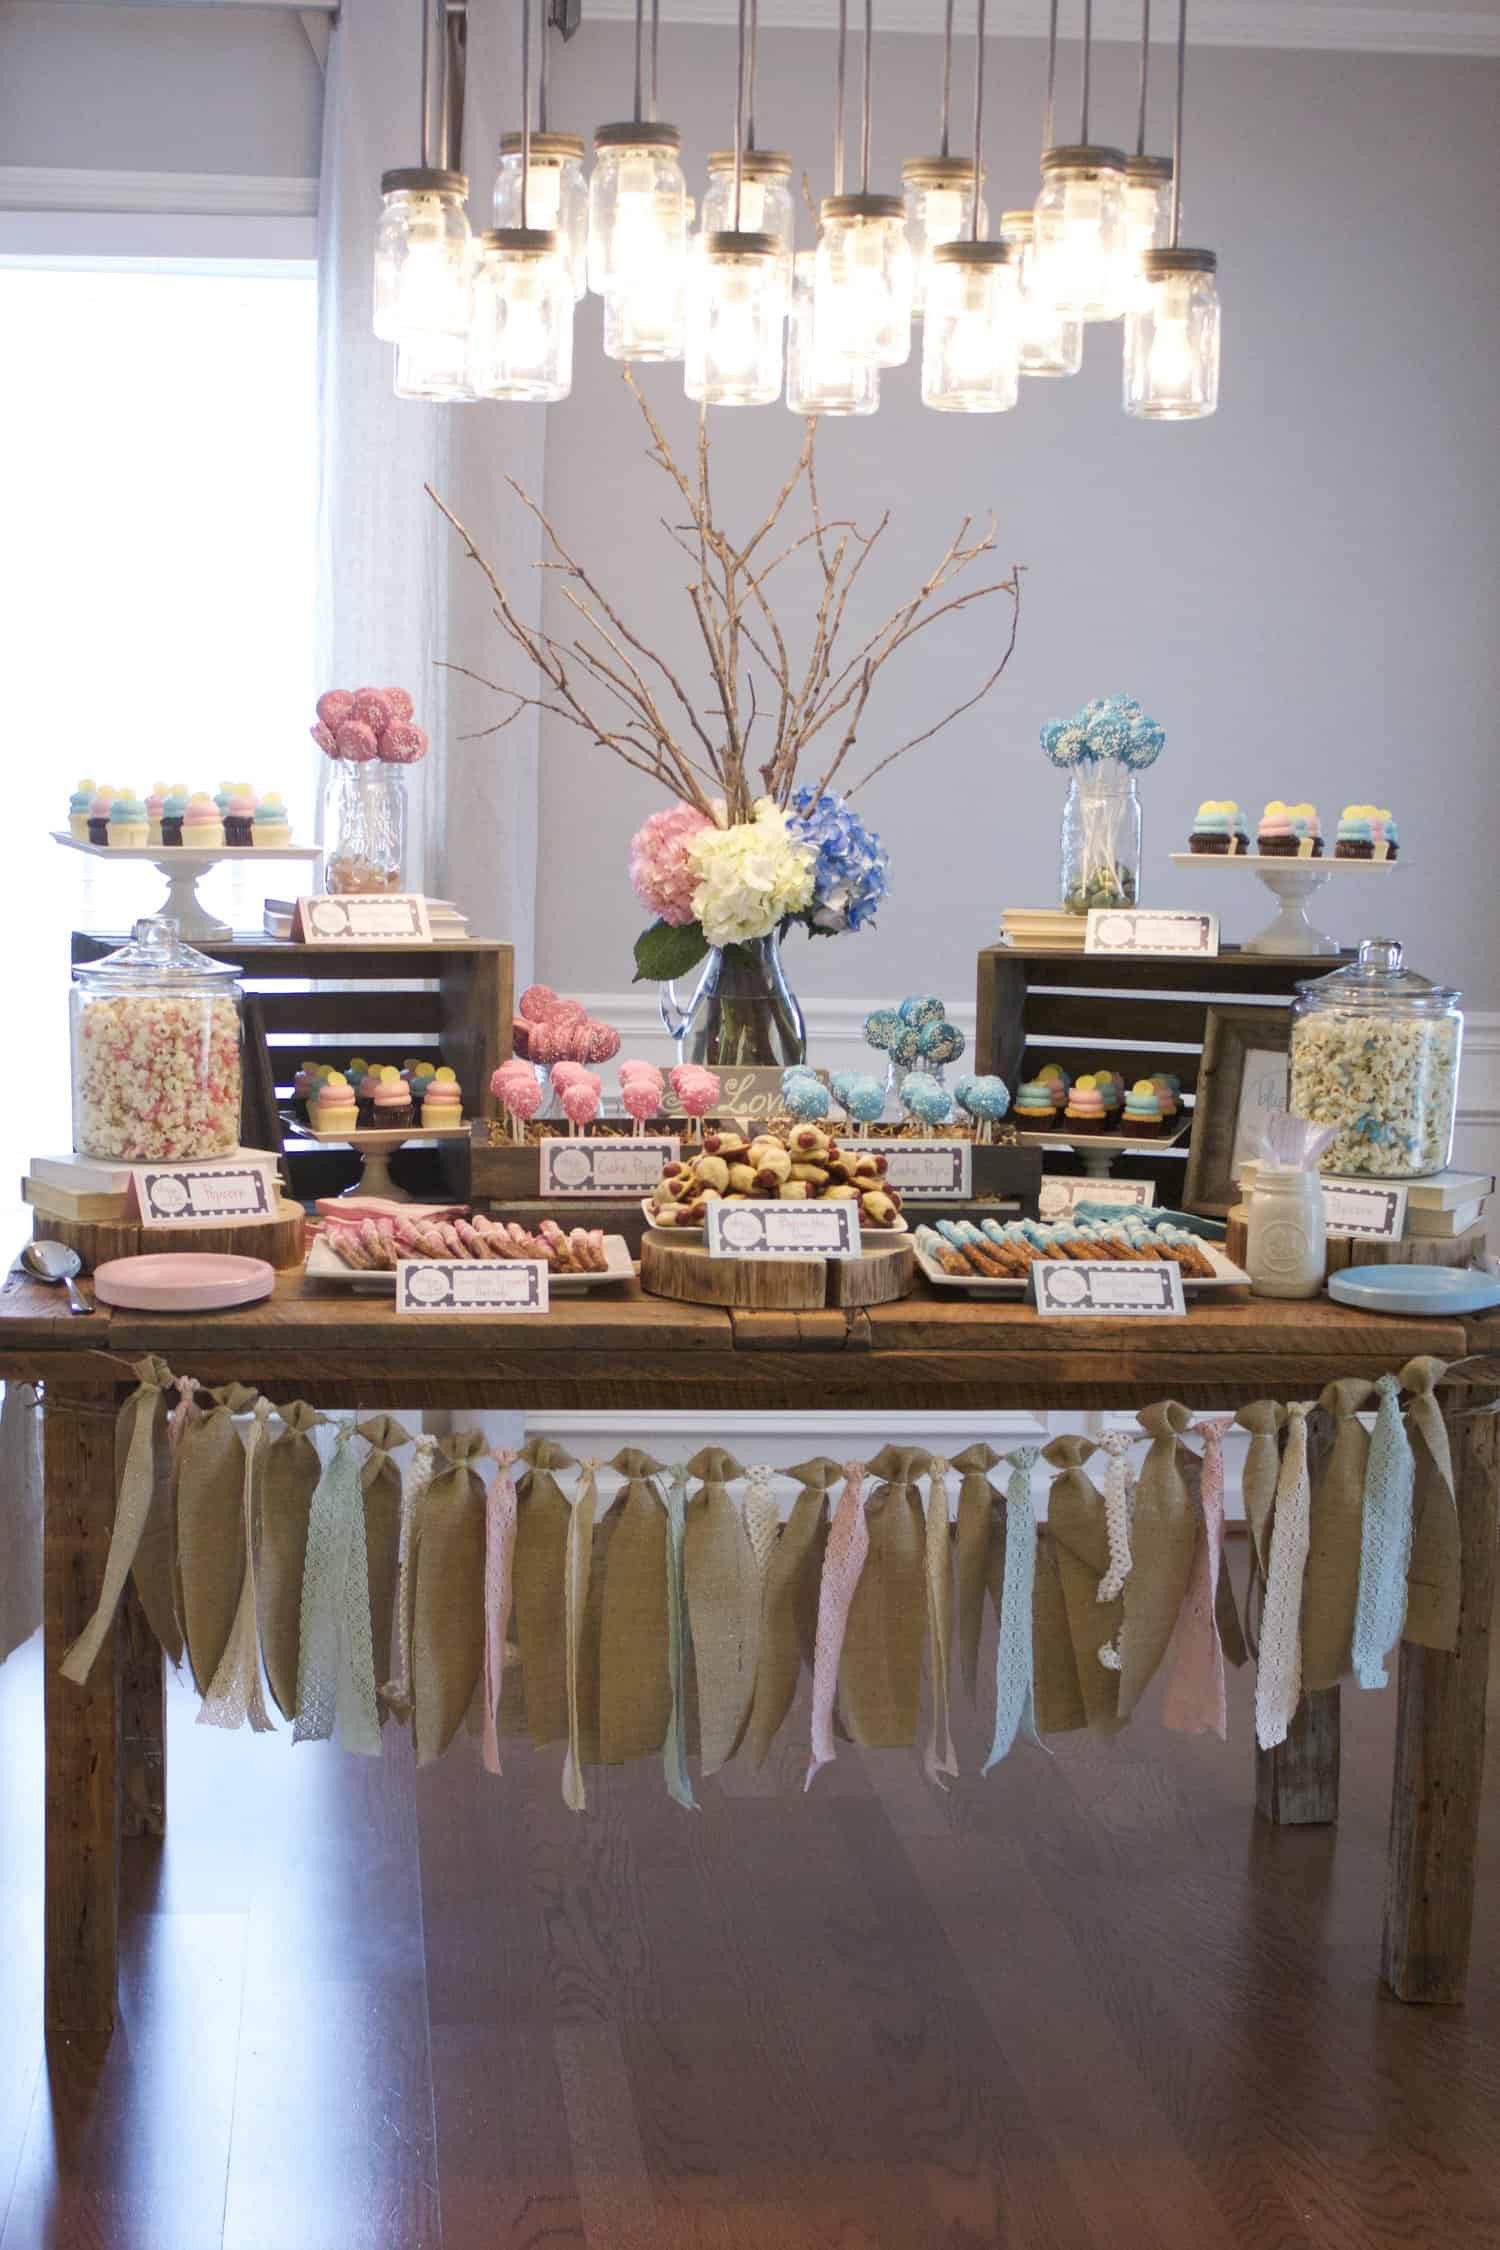 Gender Reveal Party Theme Ideas
 17 Tips To Throw An Unfor table Gender Reveal Party